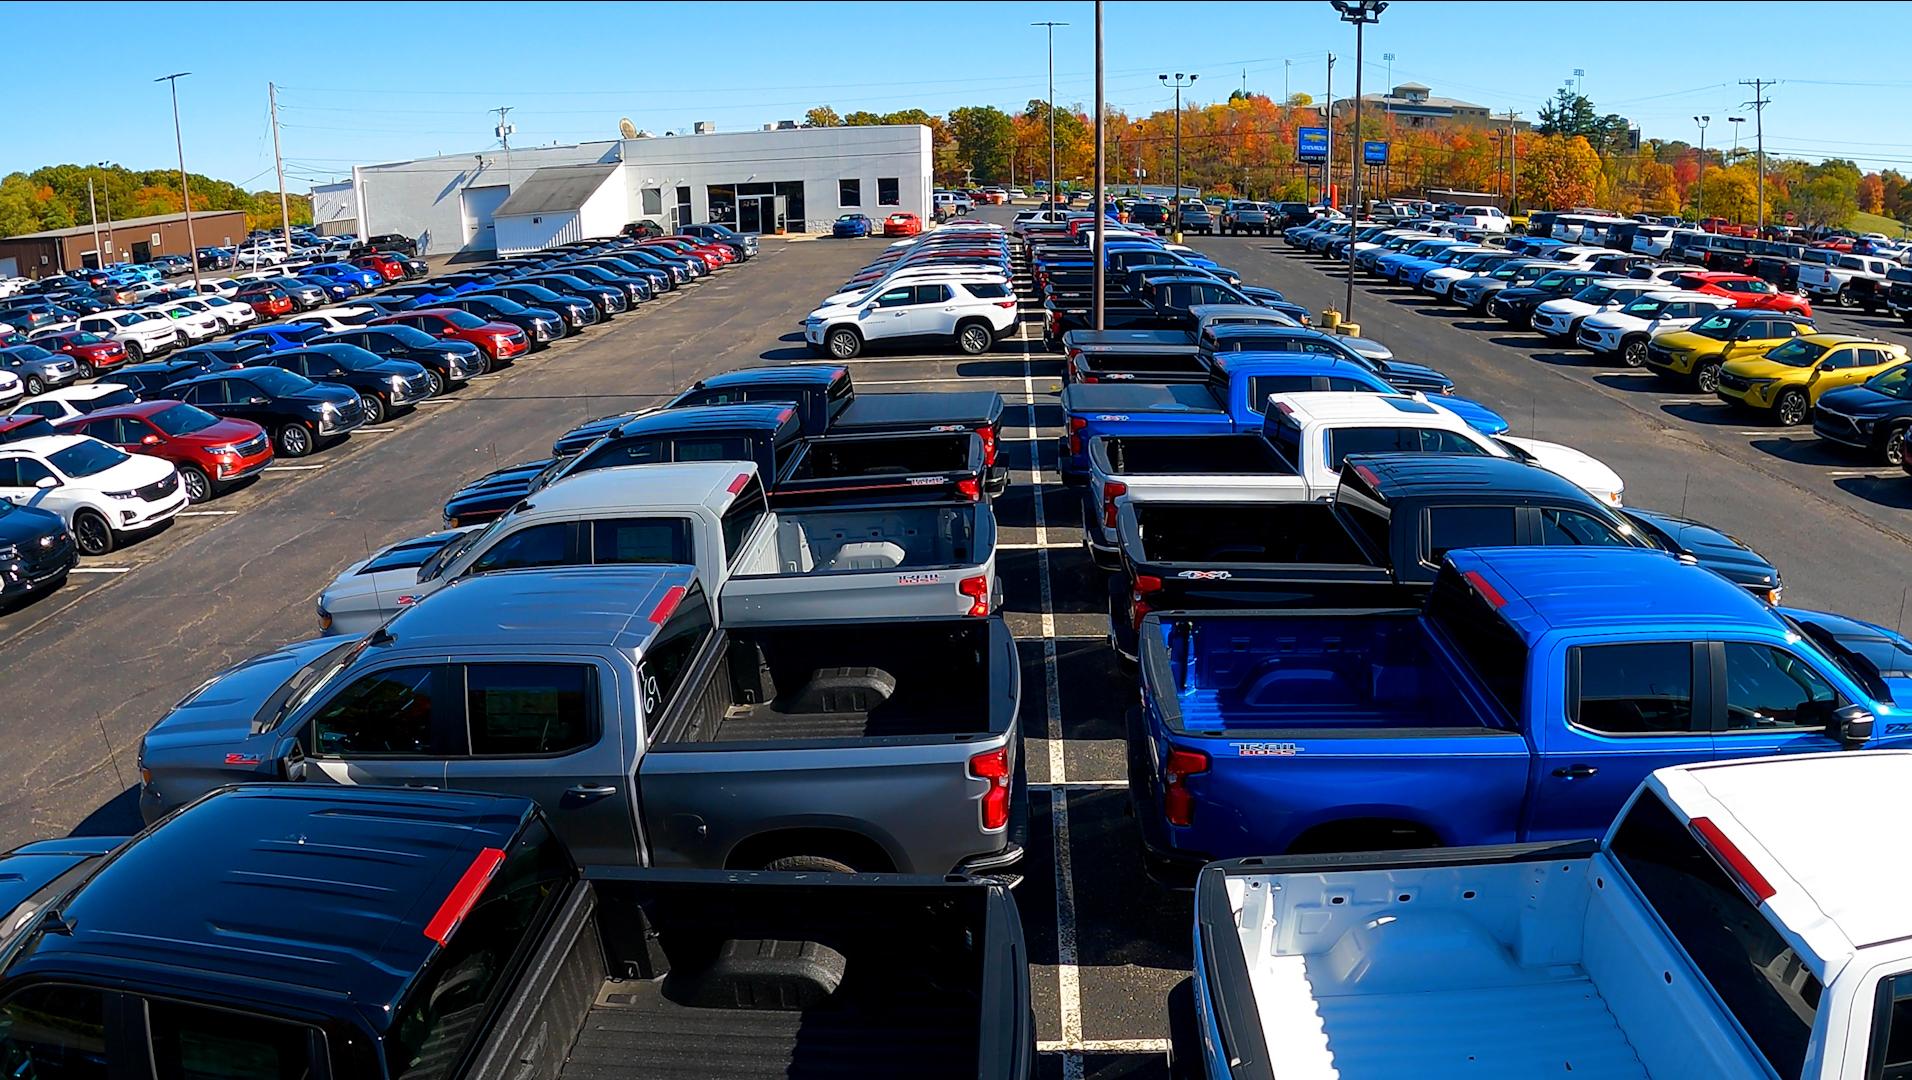 Vehicles in a dealership lot